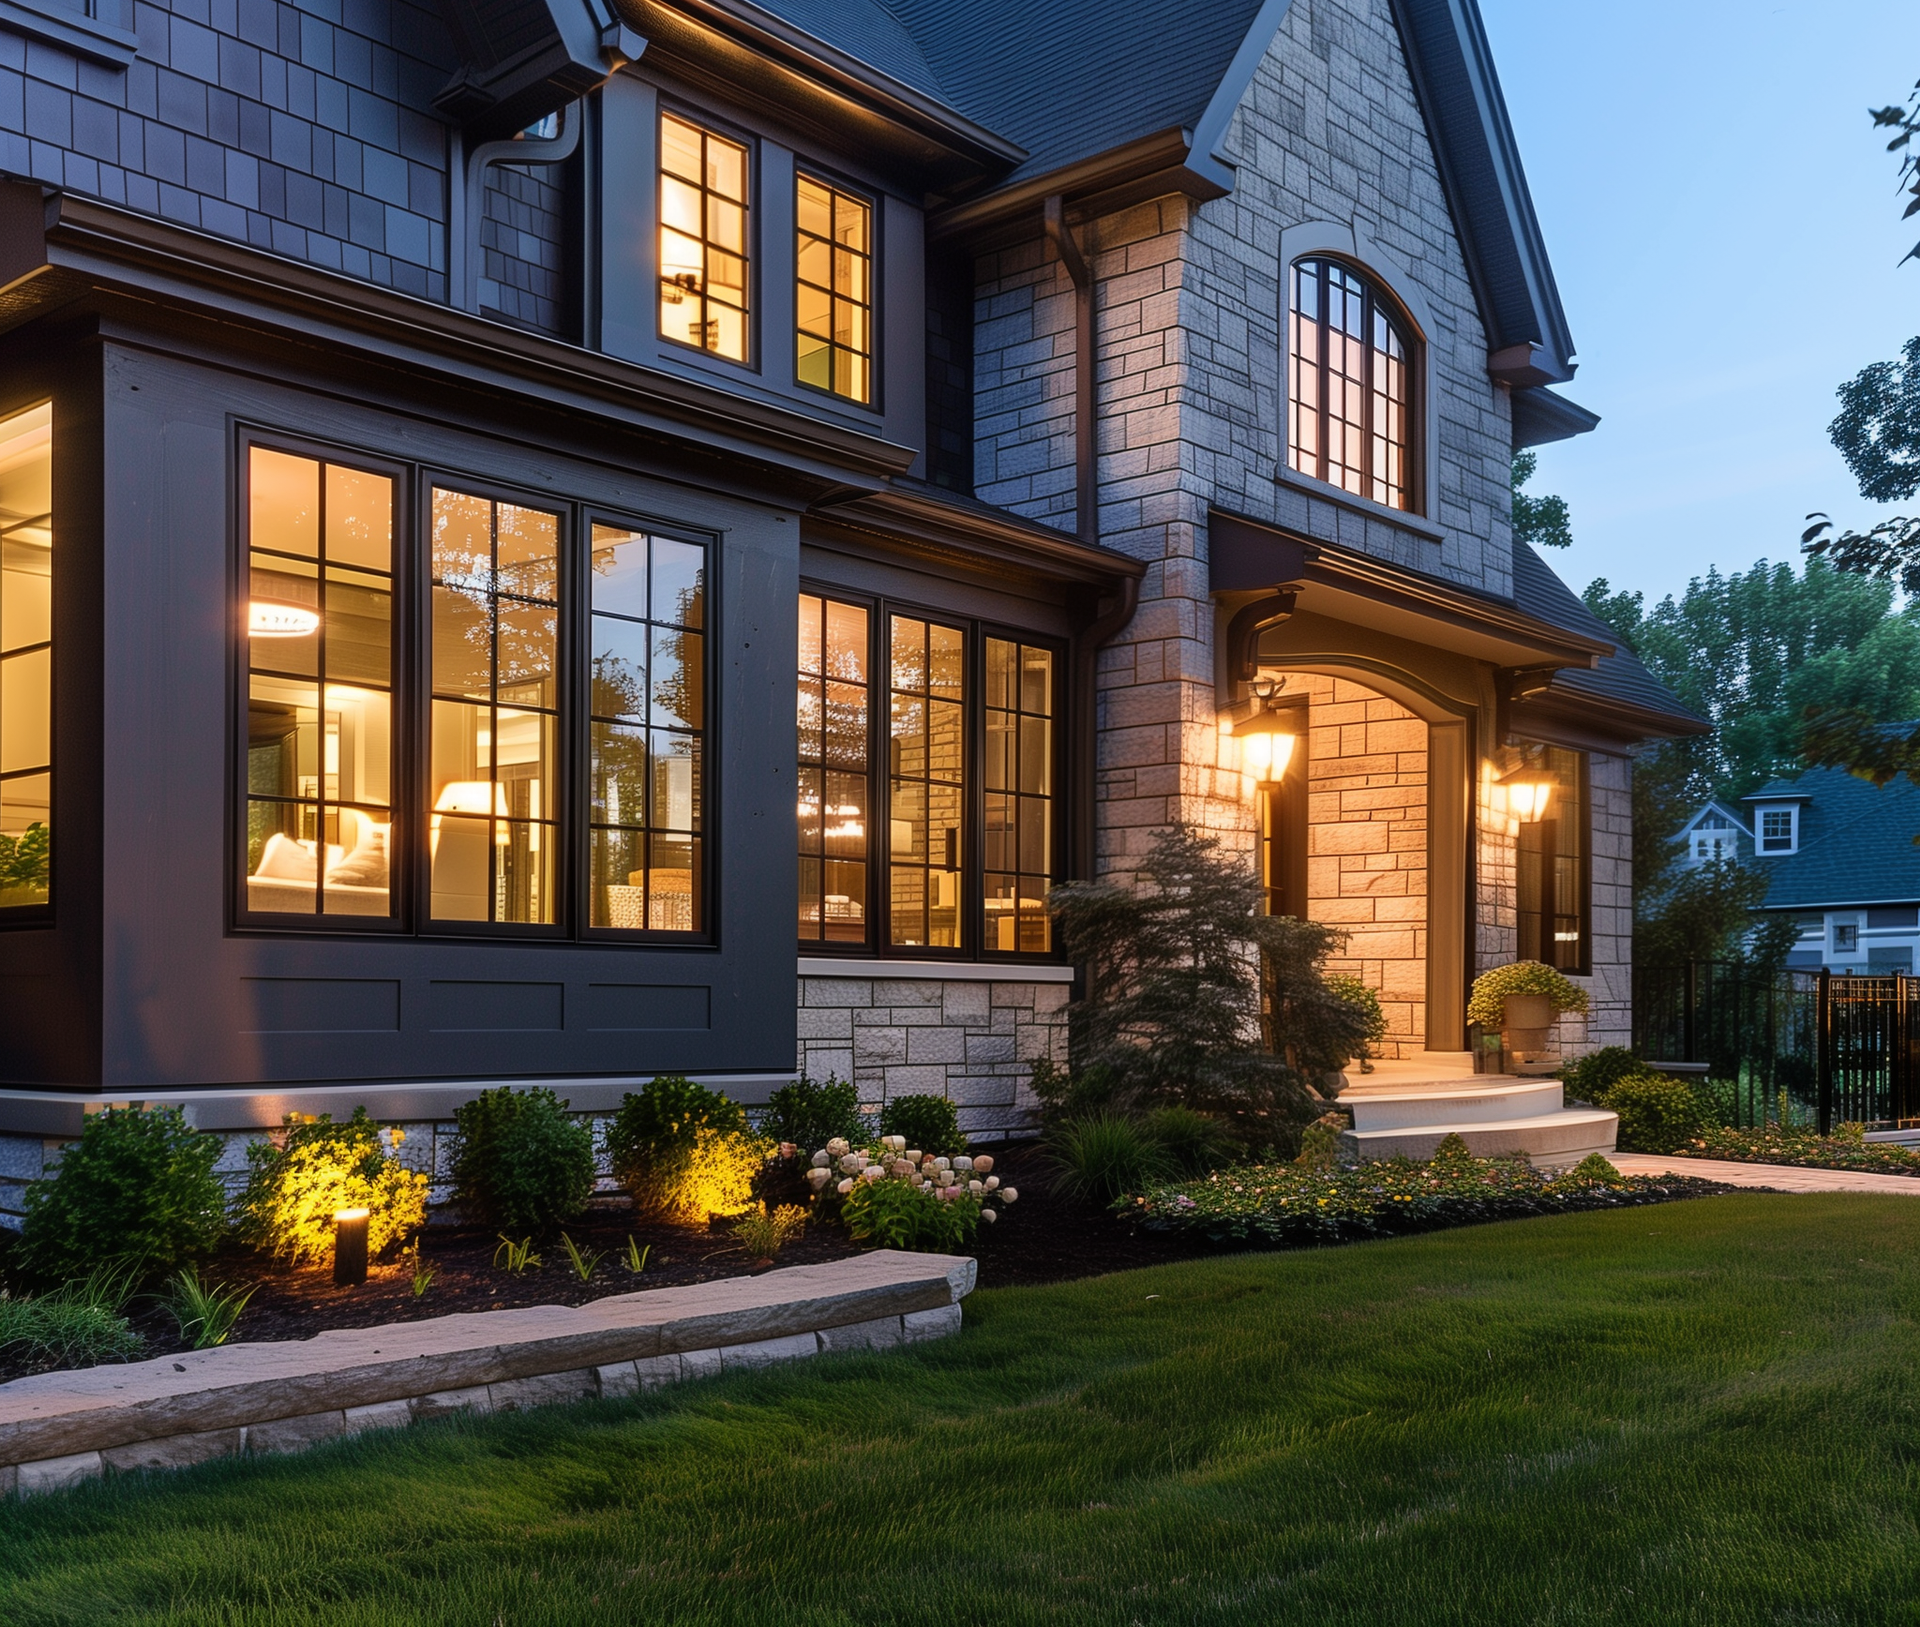 From Landscaping to Lighting: Top Tips to Maximize Your Curb Appeal